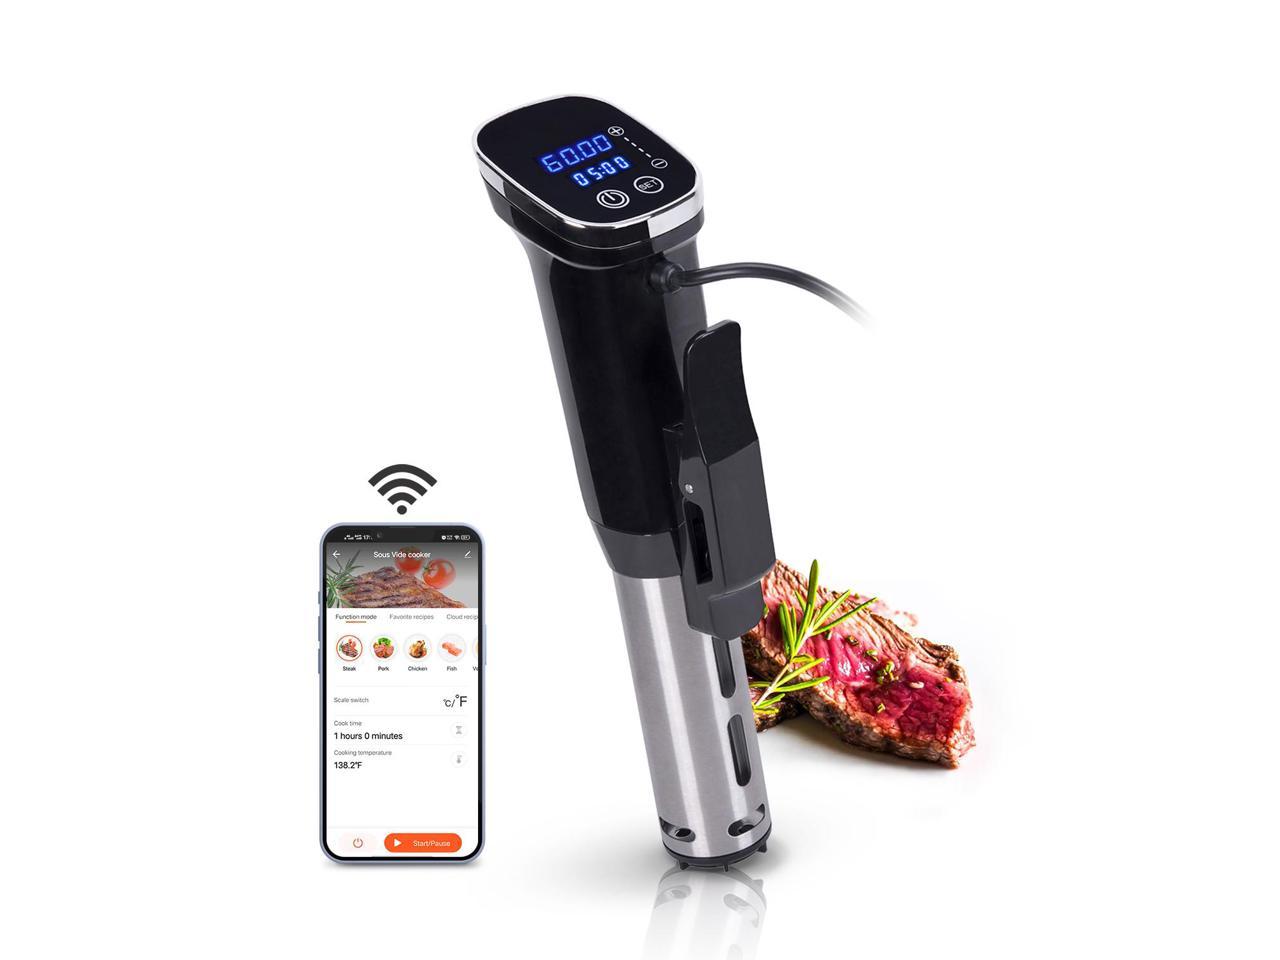 NEW-Power Precision Cooker Sous-vide Method Of Cooking As Seen On Tv Sous Vide 